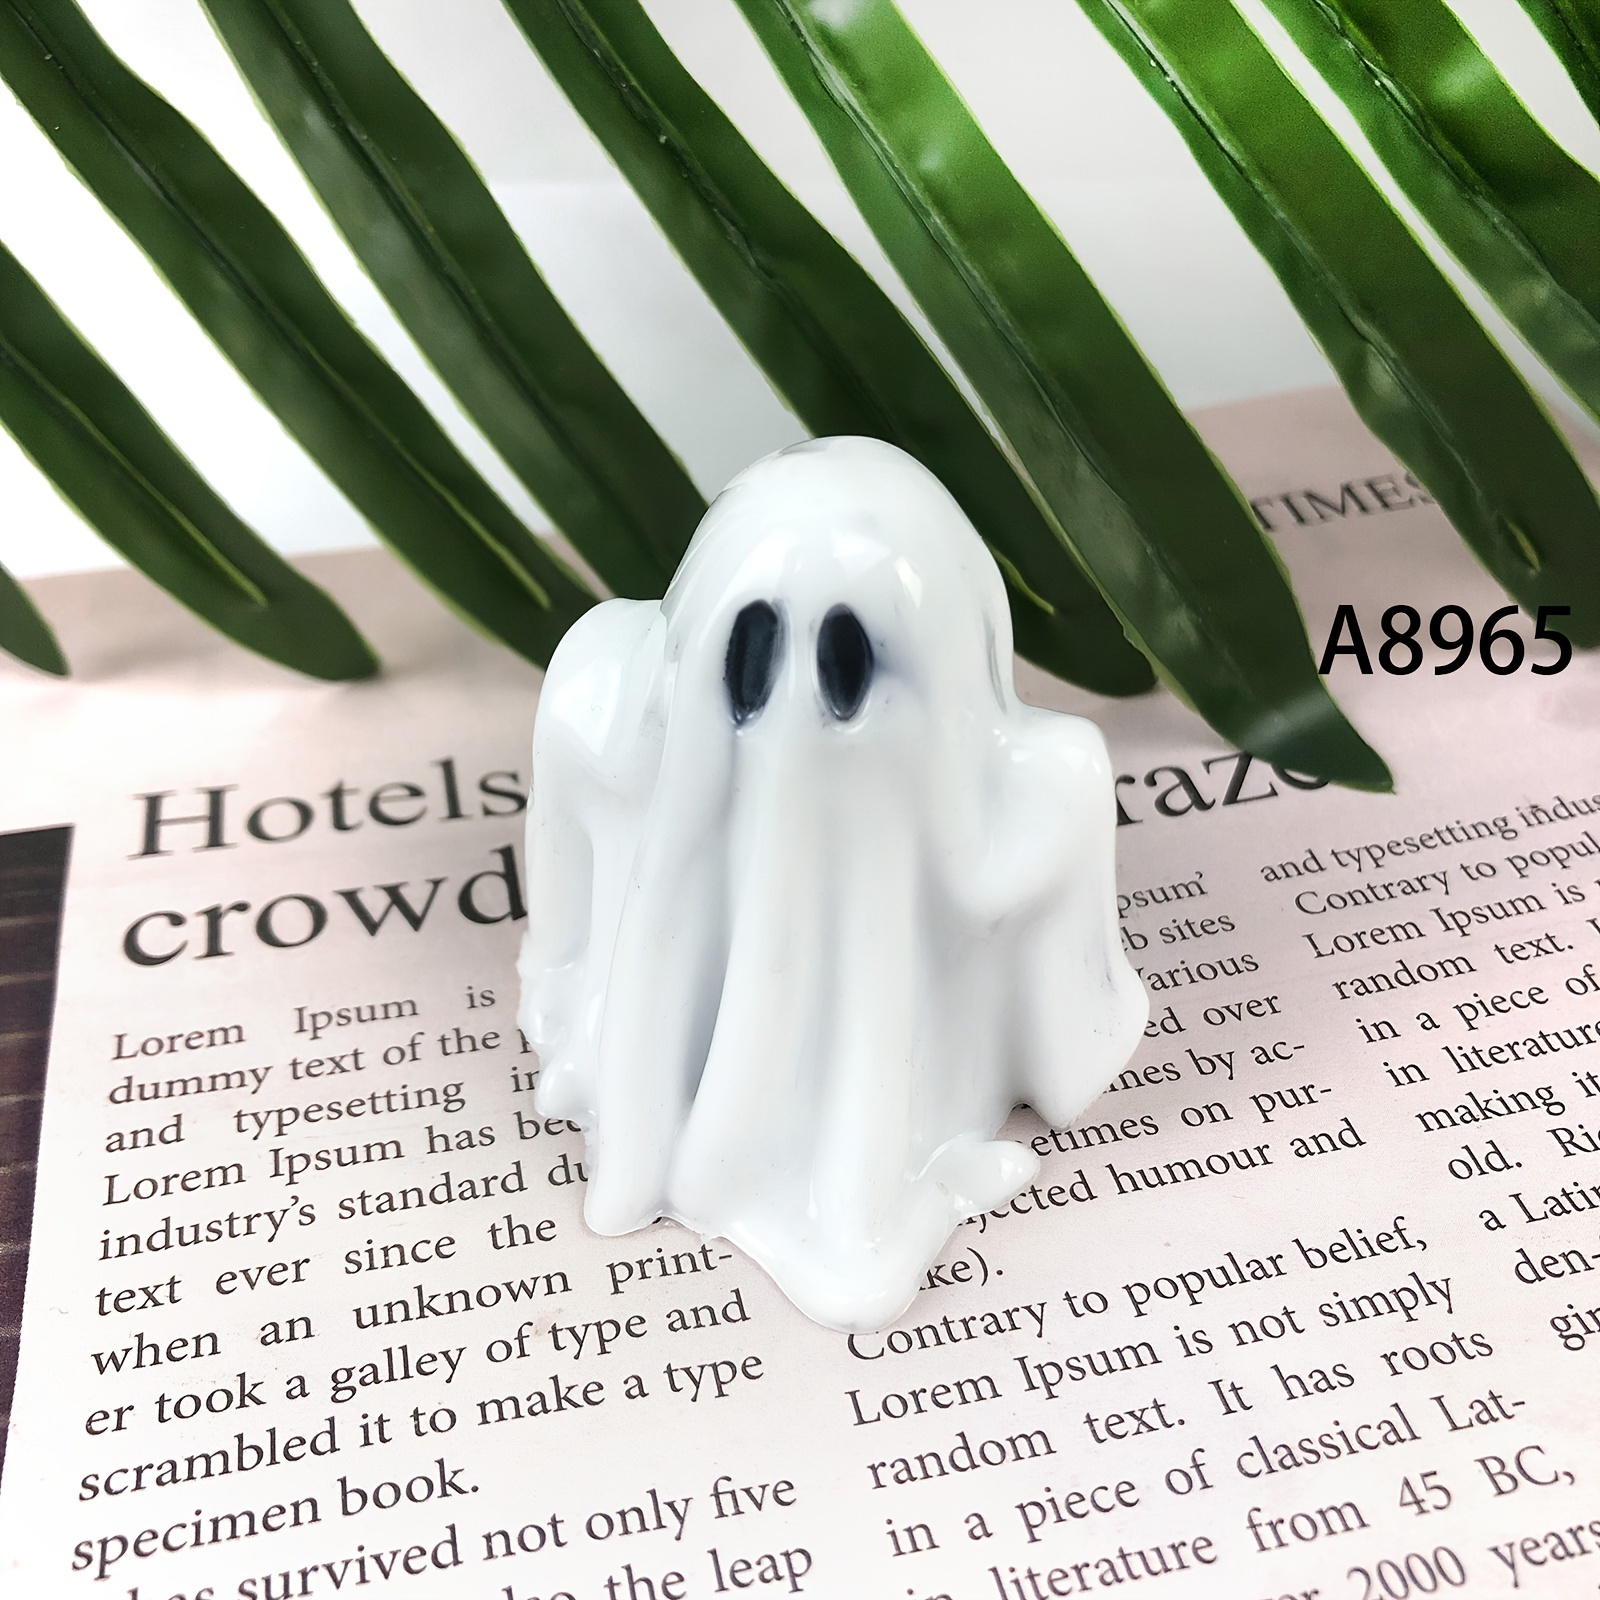 3D Silicone Ghost Candle Mold Gypsum Resin Drop Glue Chocolate